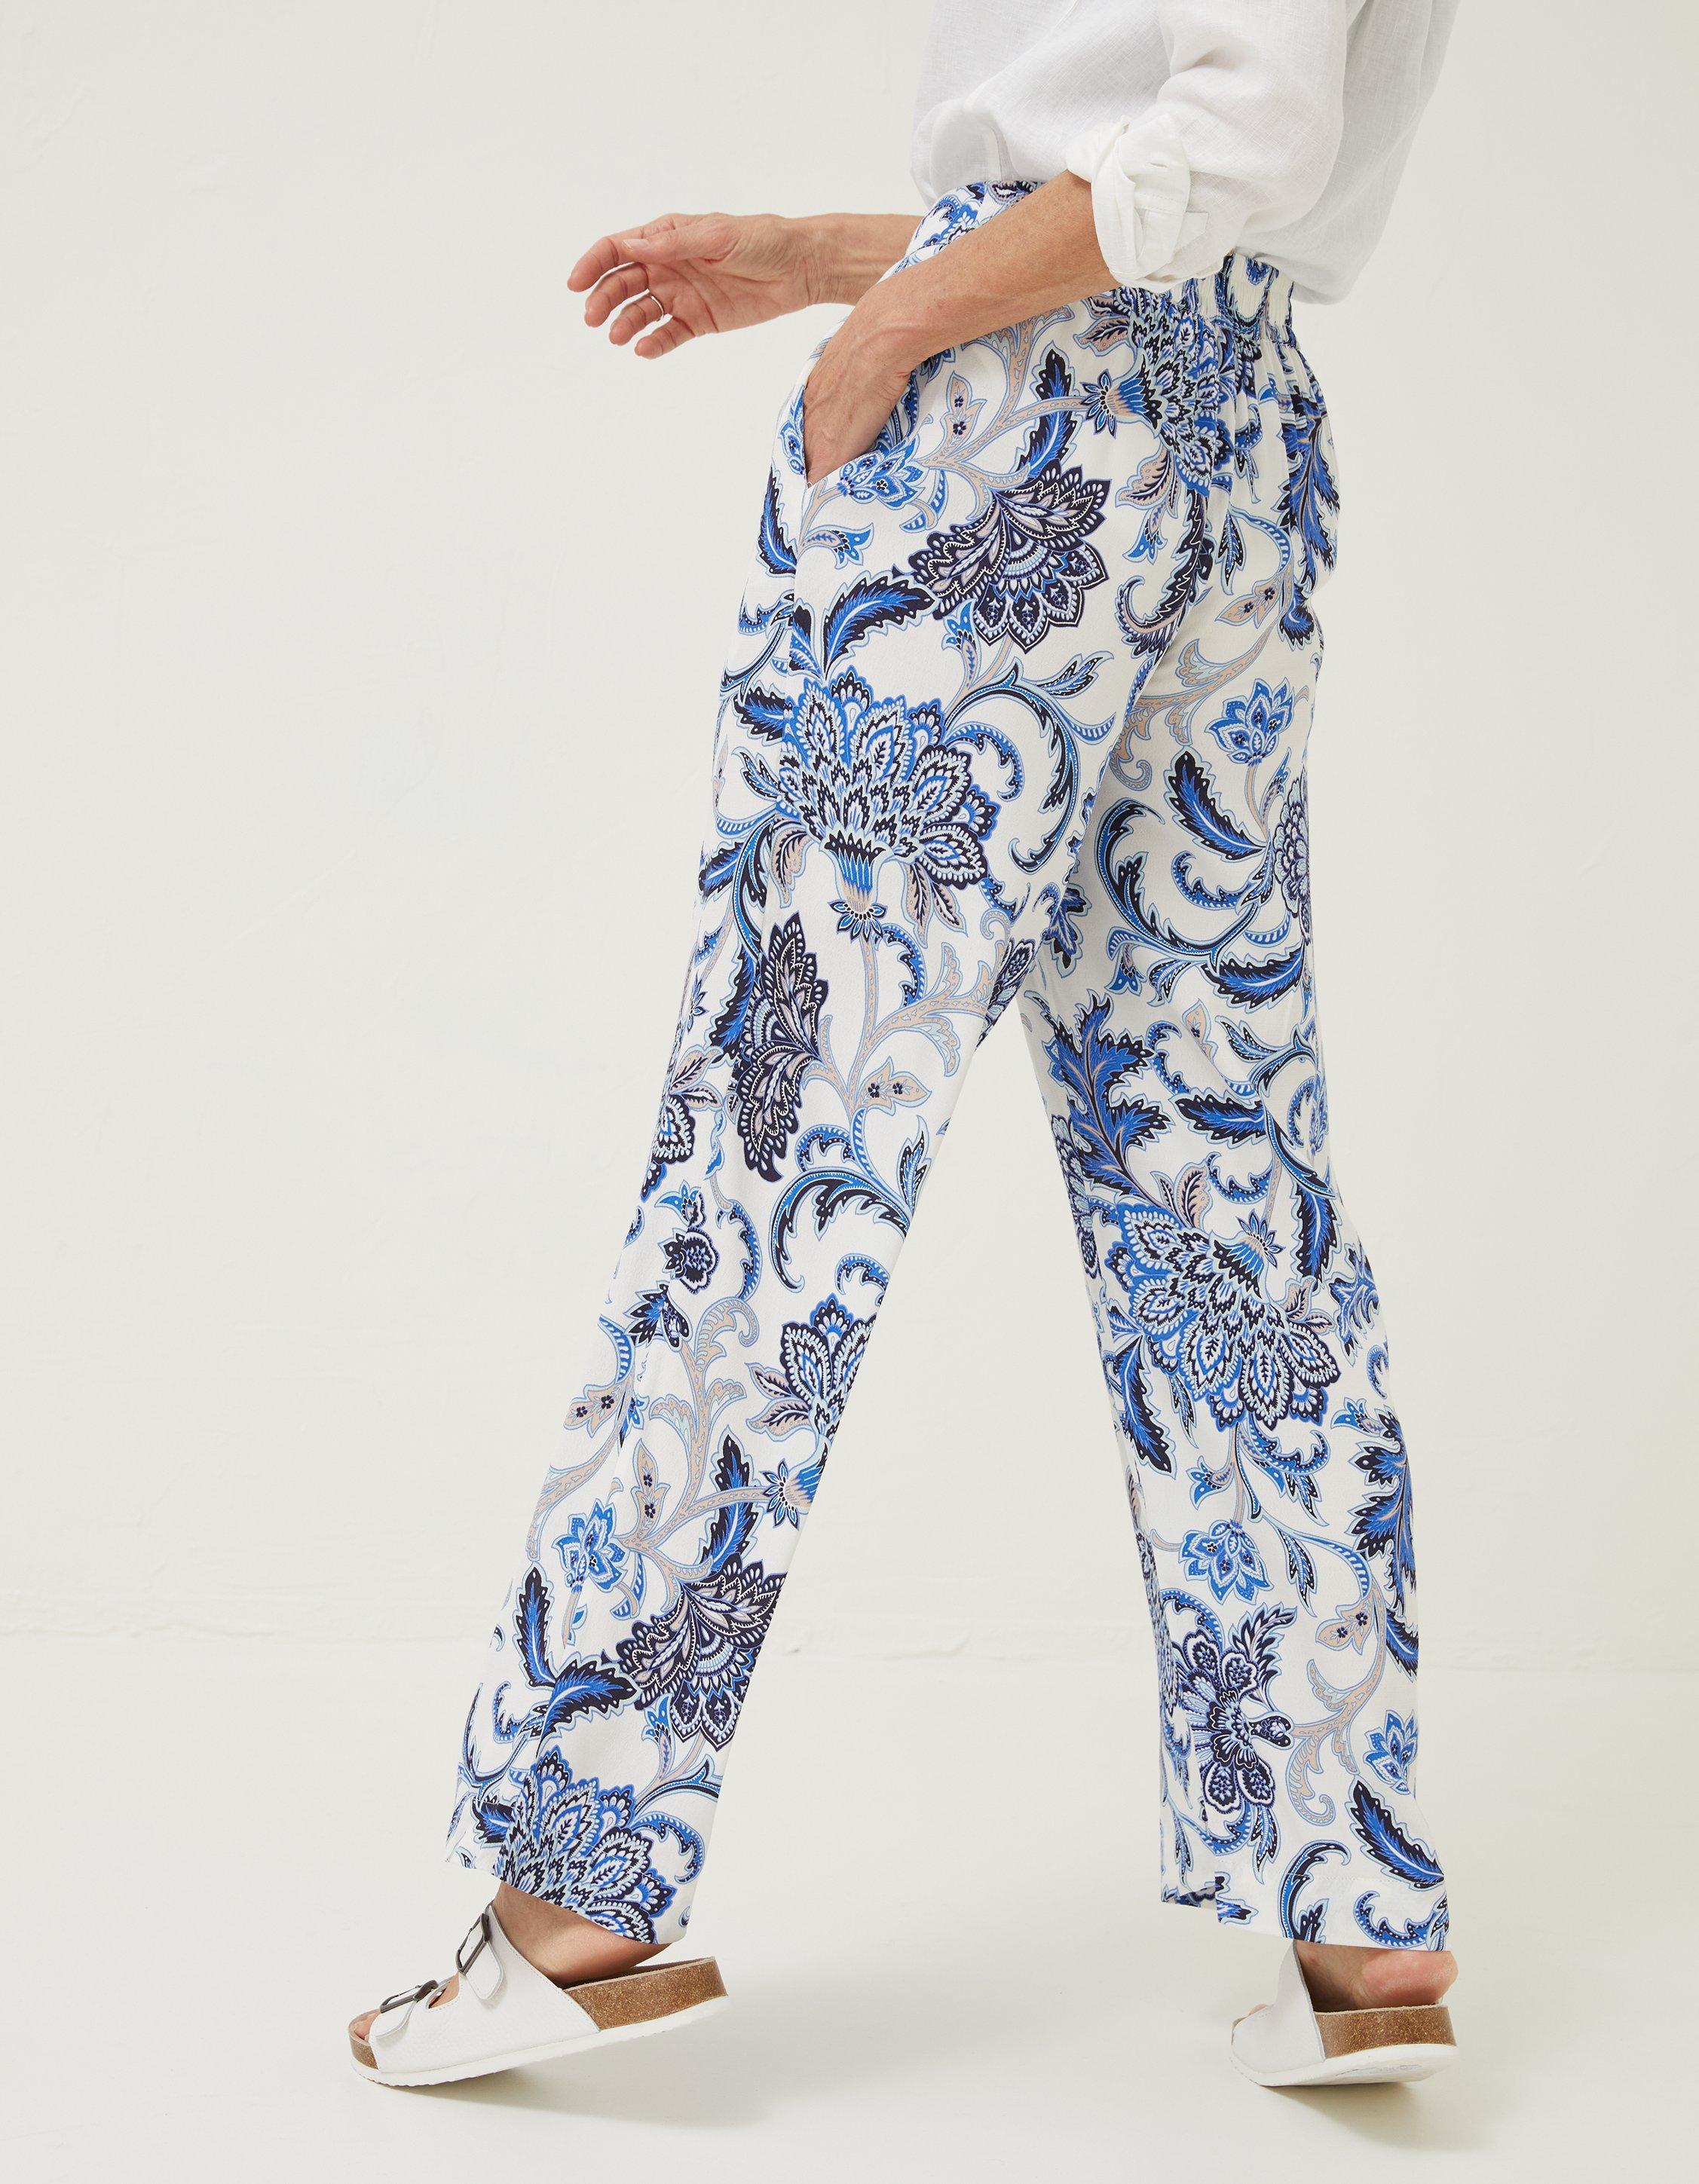 28 Modern ways to Wear Palazzo Pants with other Outfits  Tropical fashion,  Palazzo pants outfit, Tropical pants